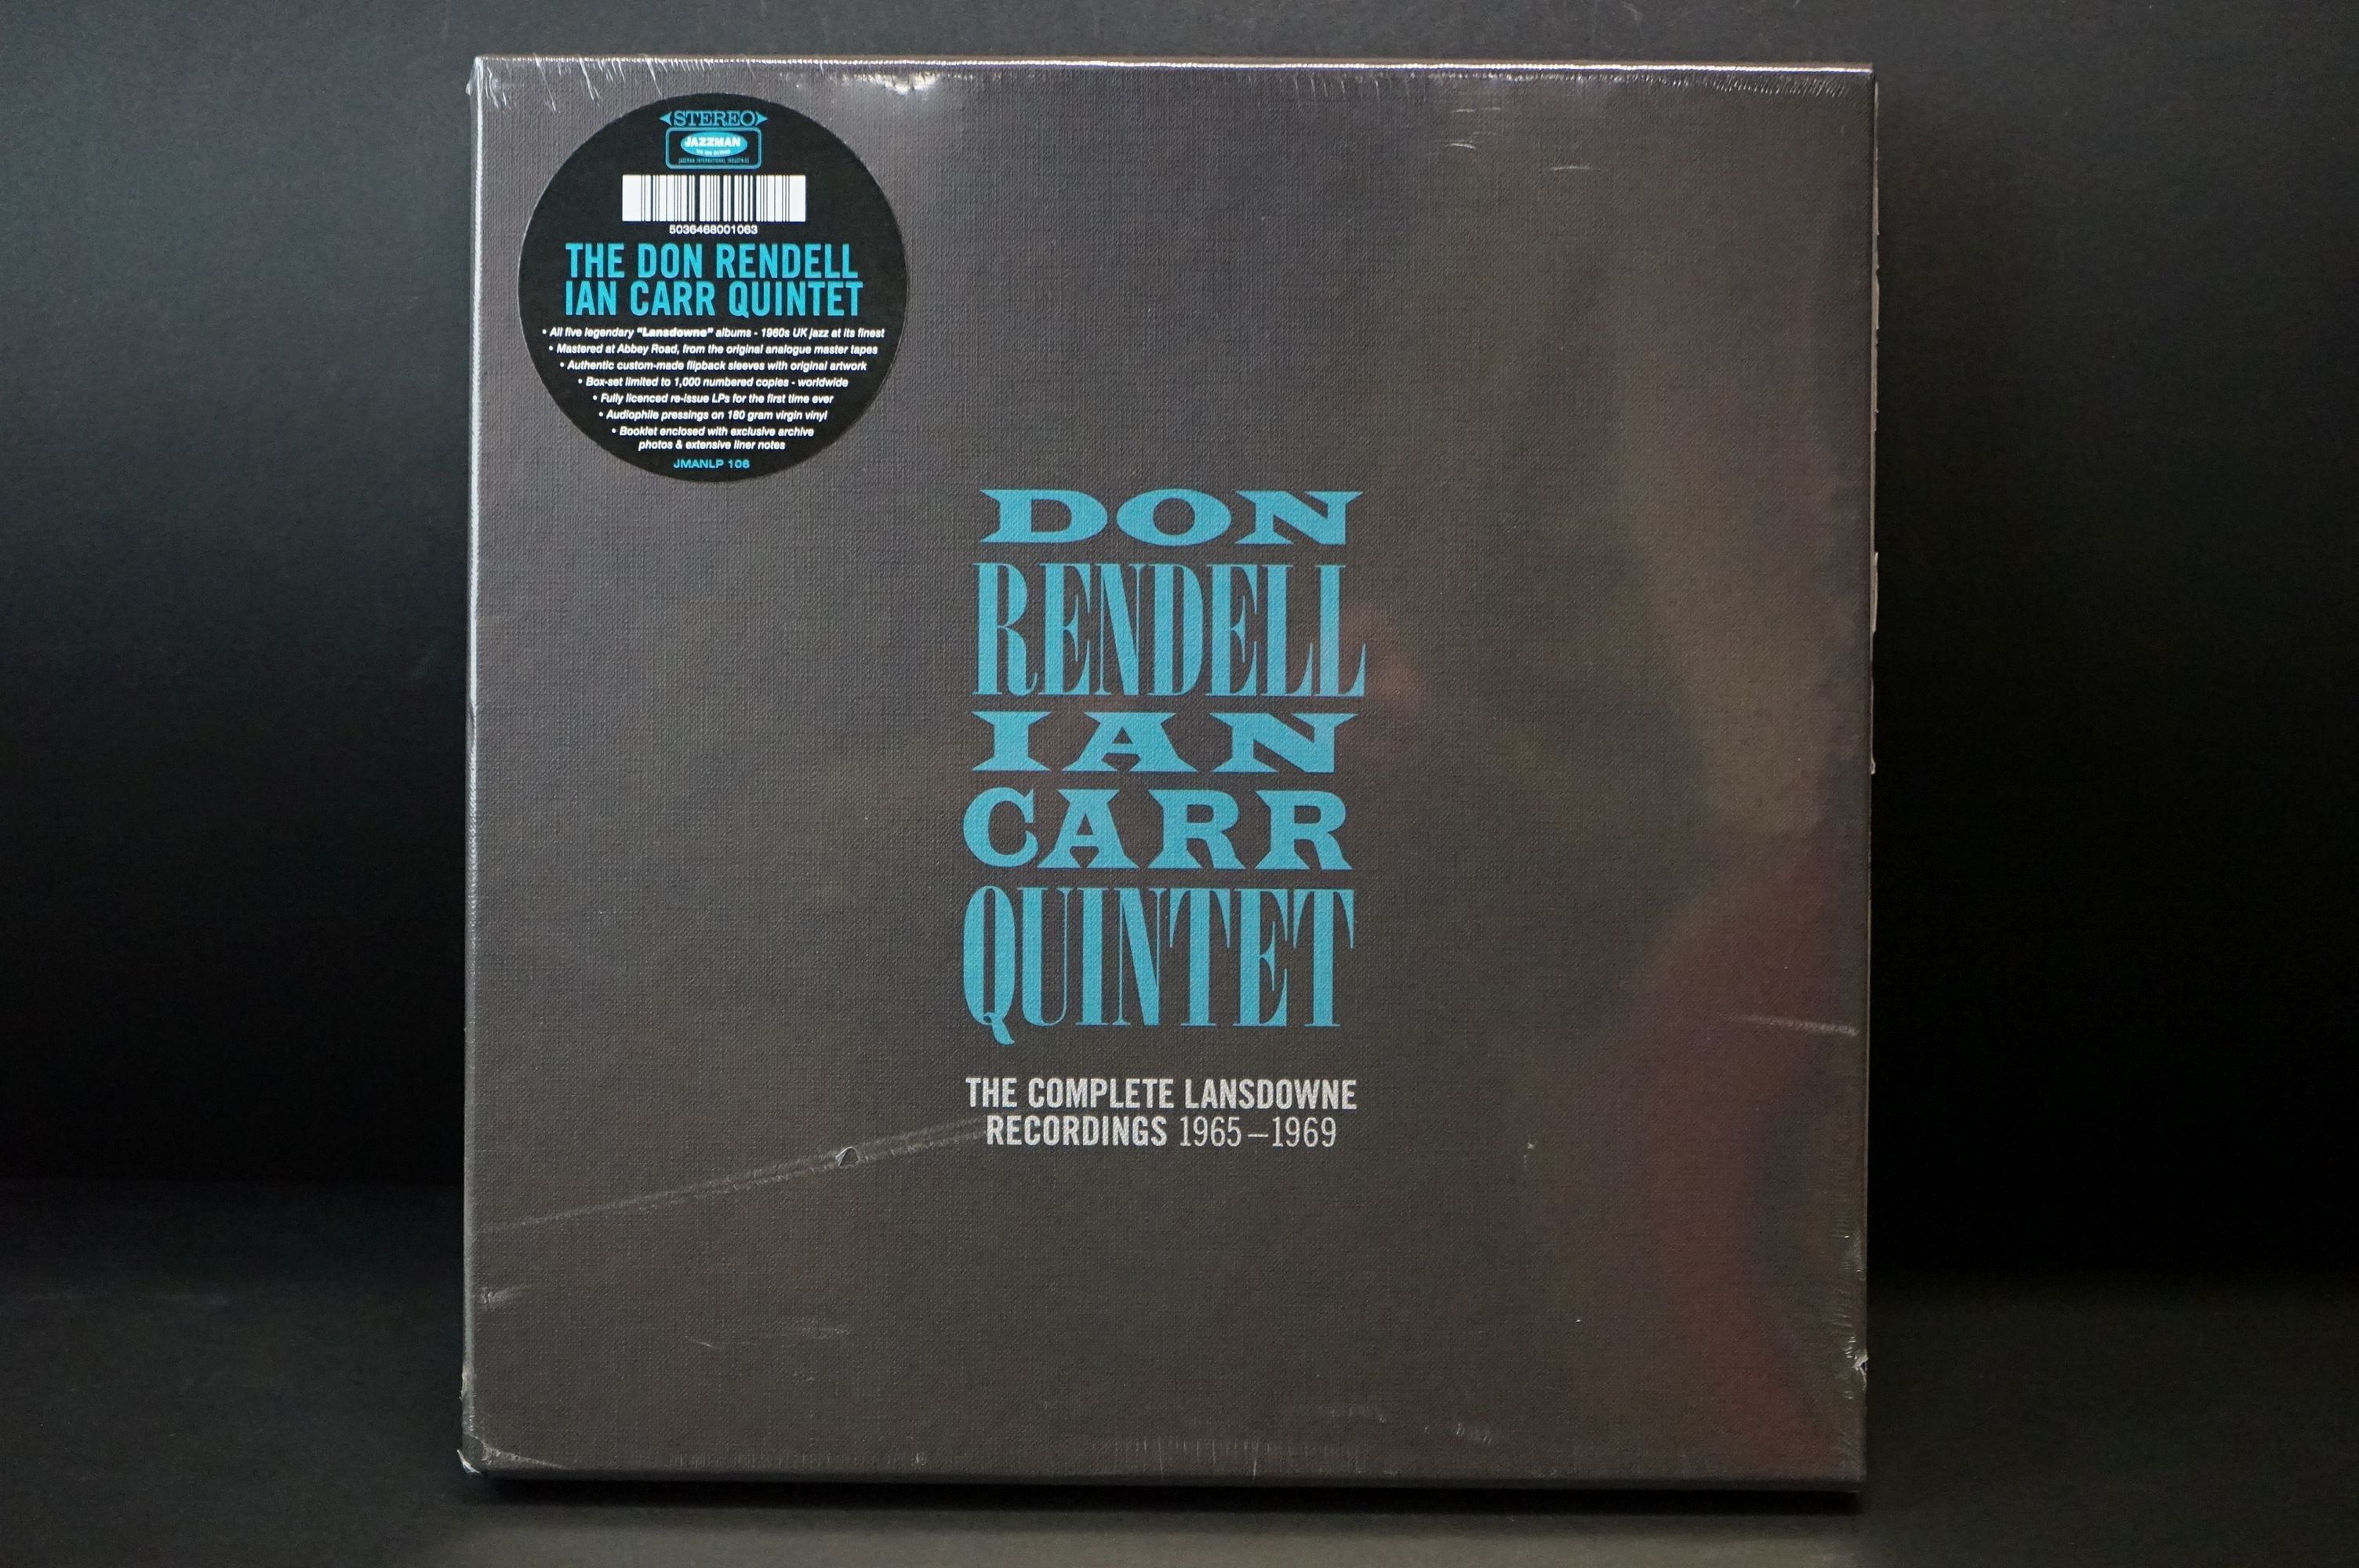 Vinyl - Sealed The Don Rendell Ian Carr Quintet The Complete Lansdowne Recordings 1965-1969 Box